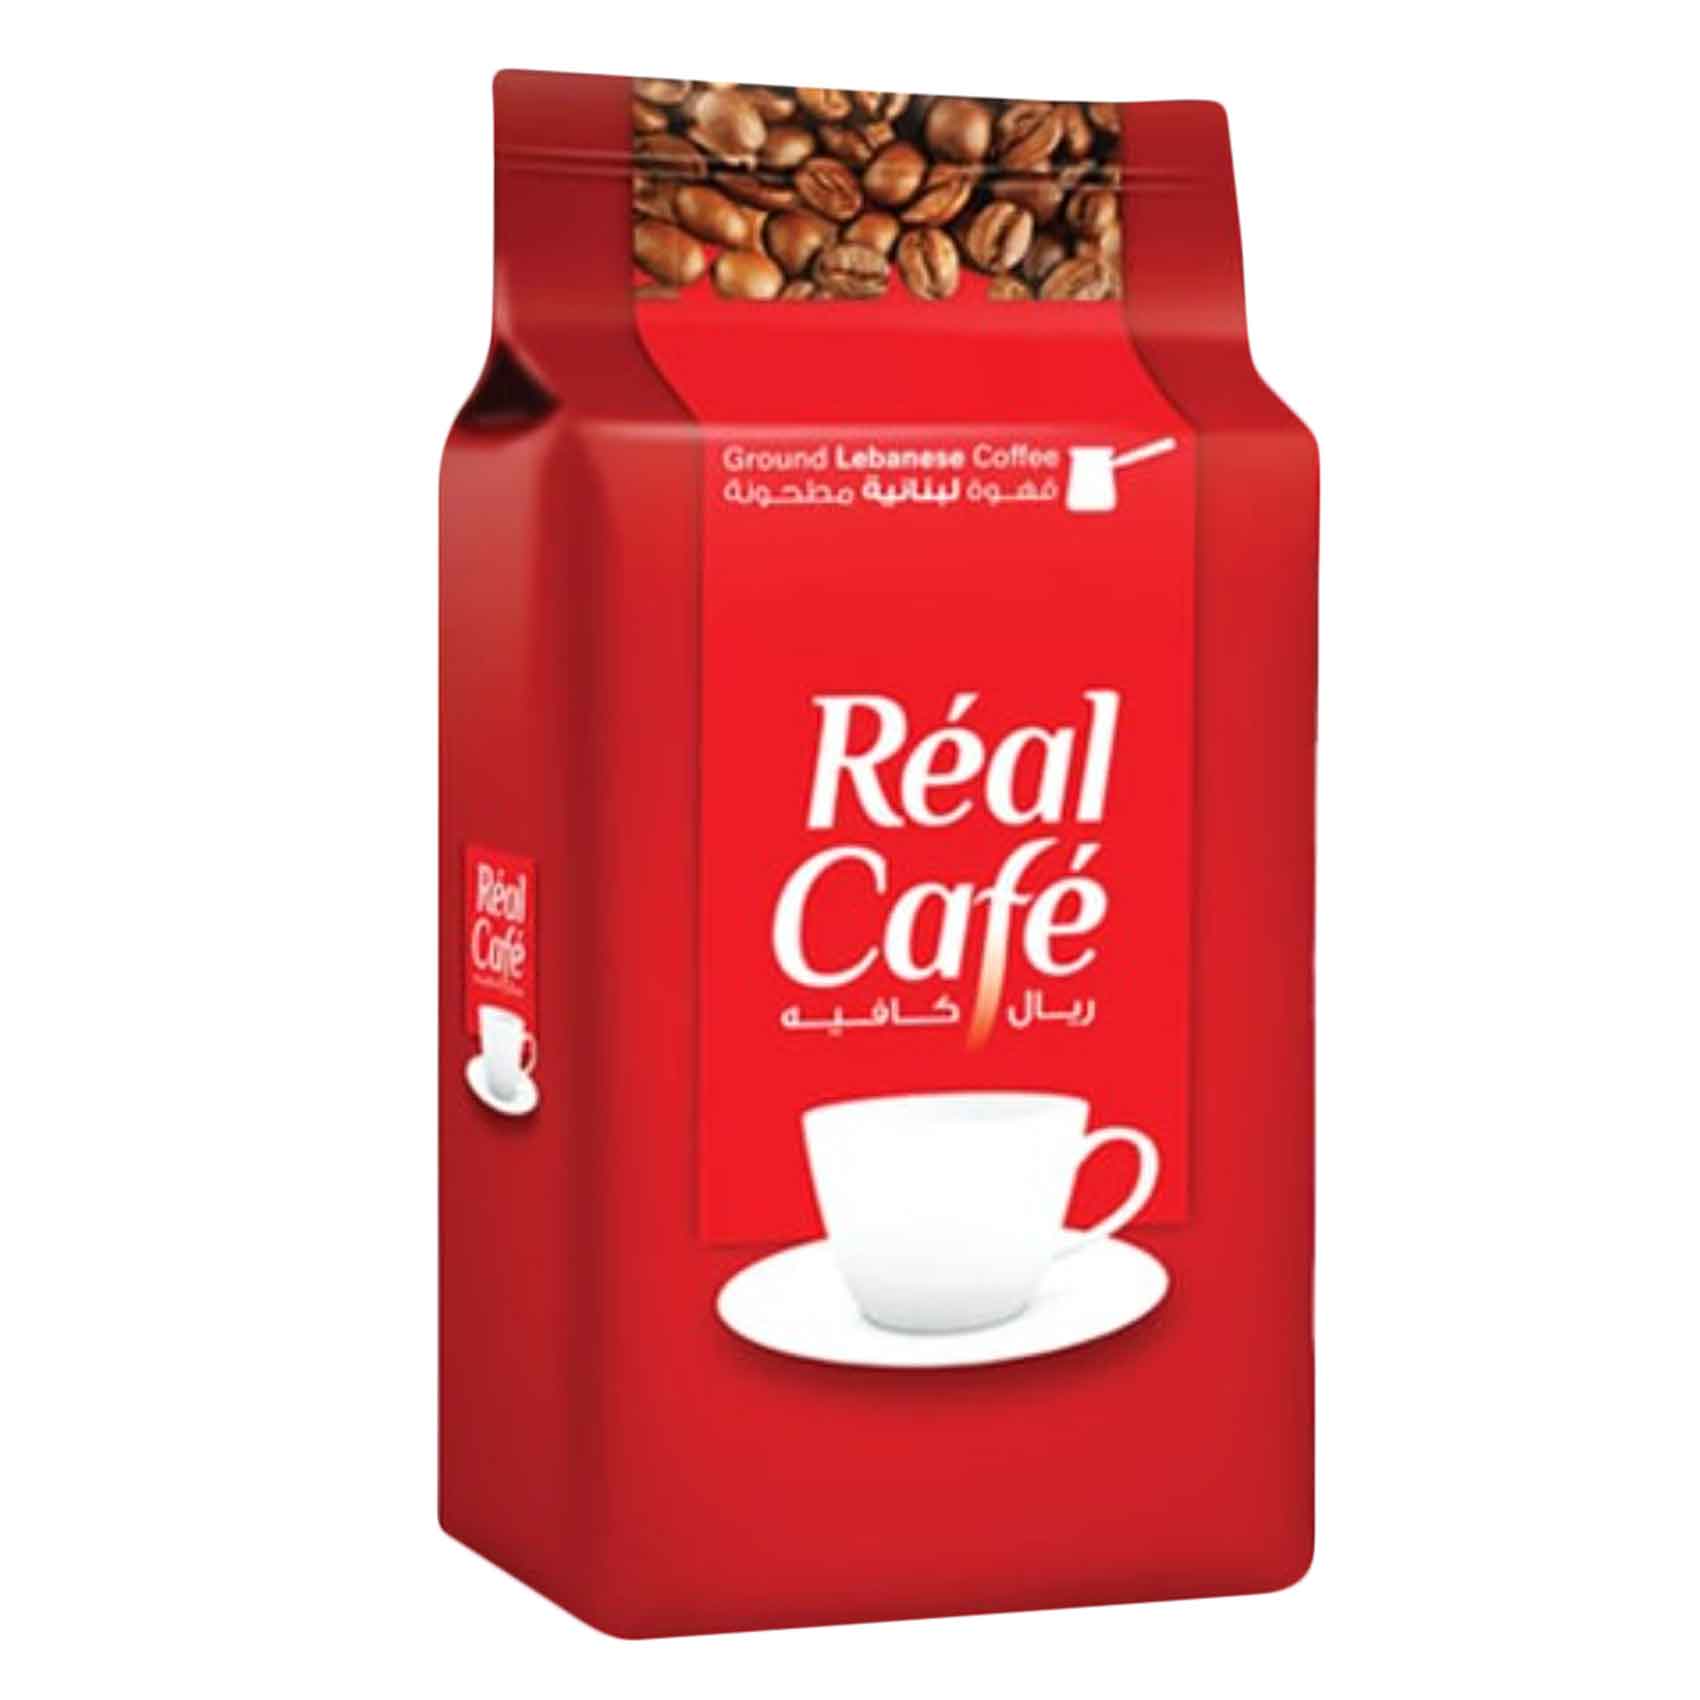 Real Cafe Coffee 180g